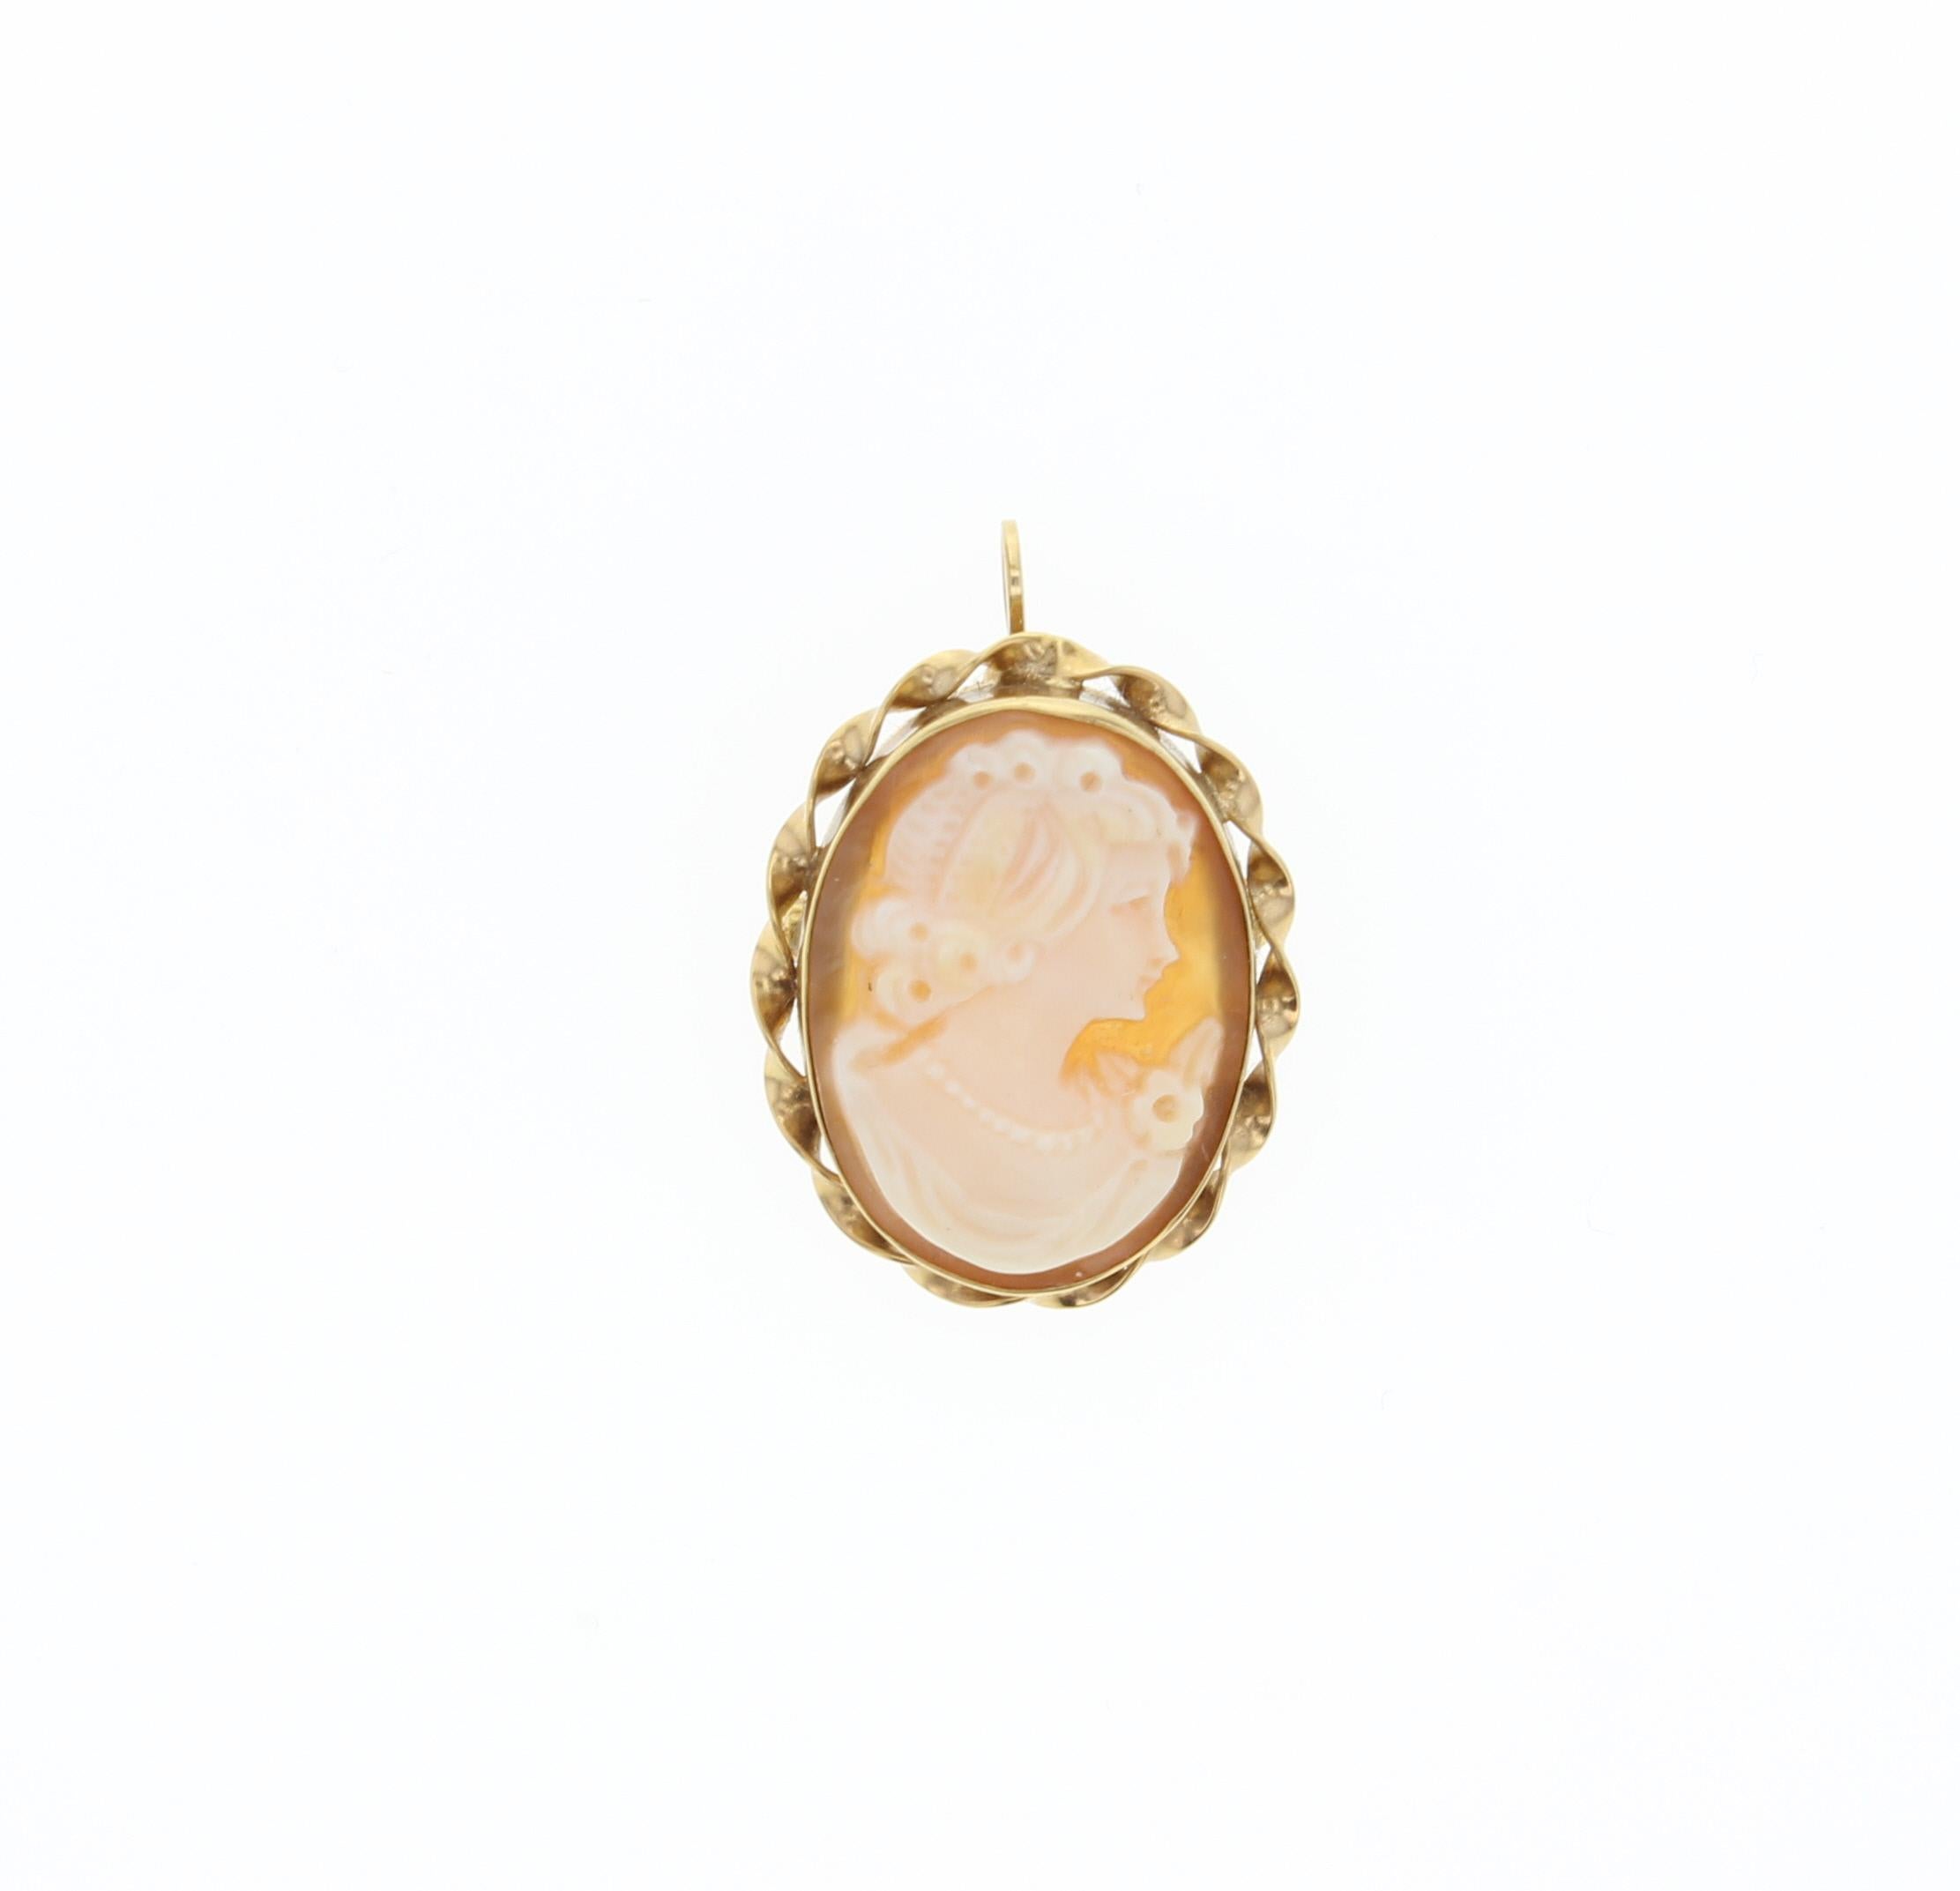 Women's or Men's Shell Cameo Brooch Pendant with Oval Gold Tone Frame For Sale